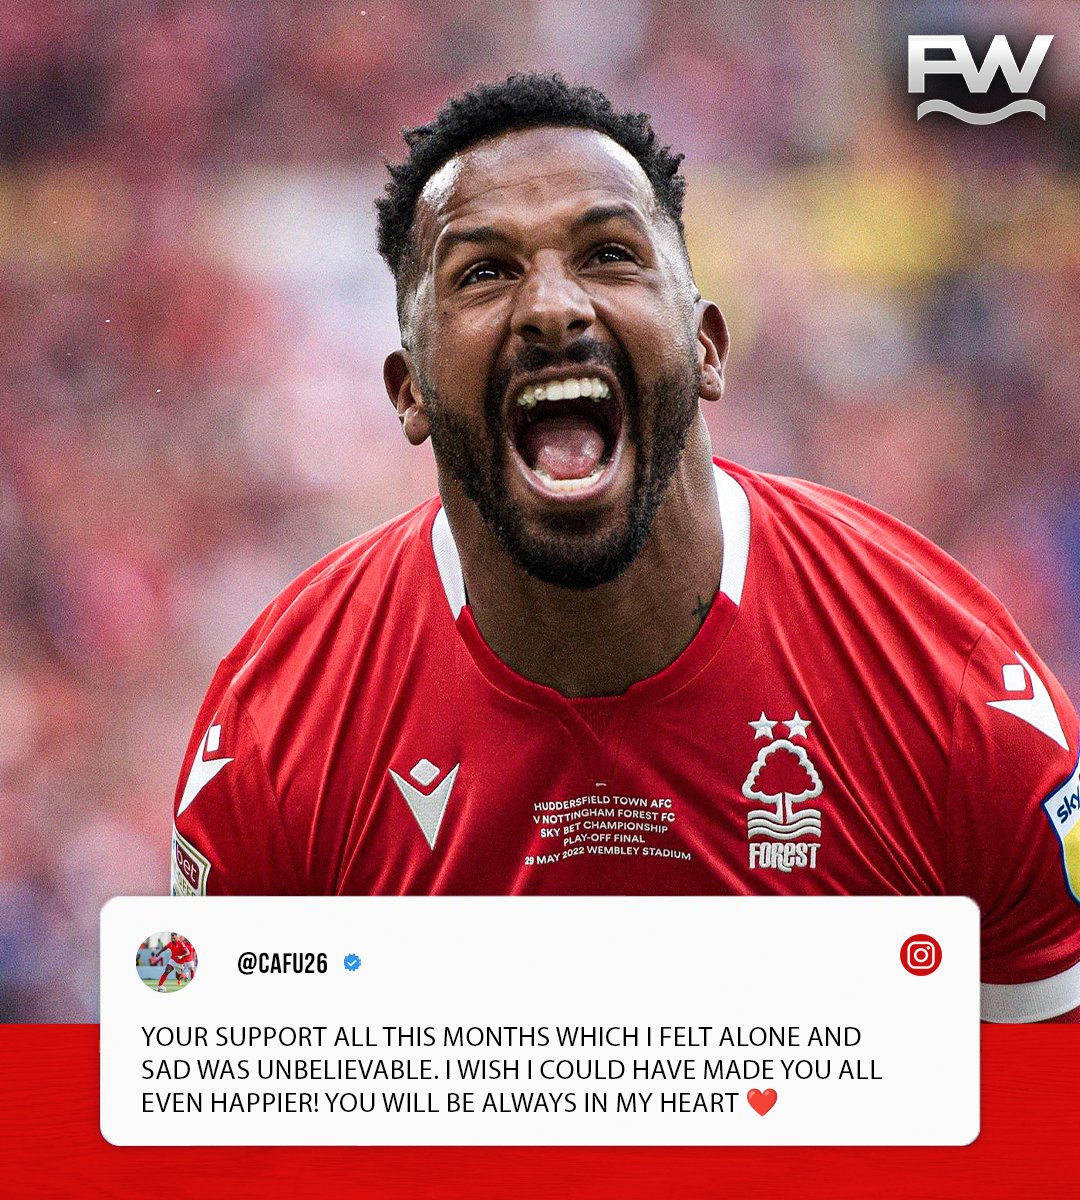 Cafú makes his farewell to Nottingham Forest fans on Instagram: 'Your support all this months which I felt alone and sad was unbelievable. I wish I could have made you all even happier! You will be always in my heart ❤️' #NFFC